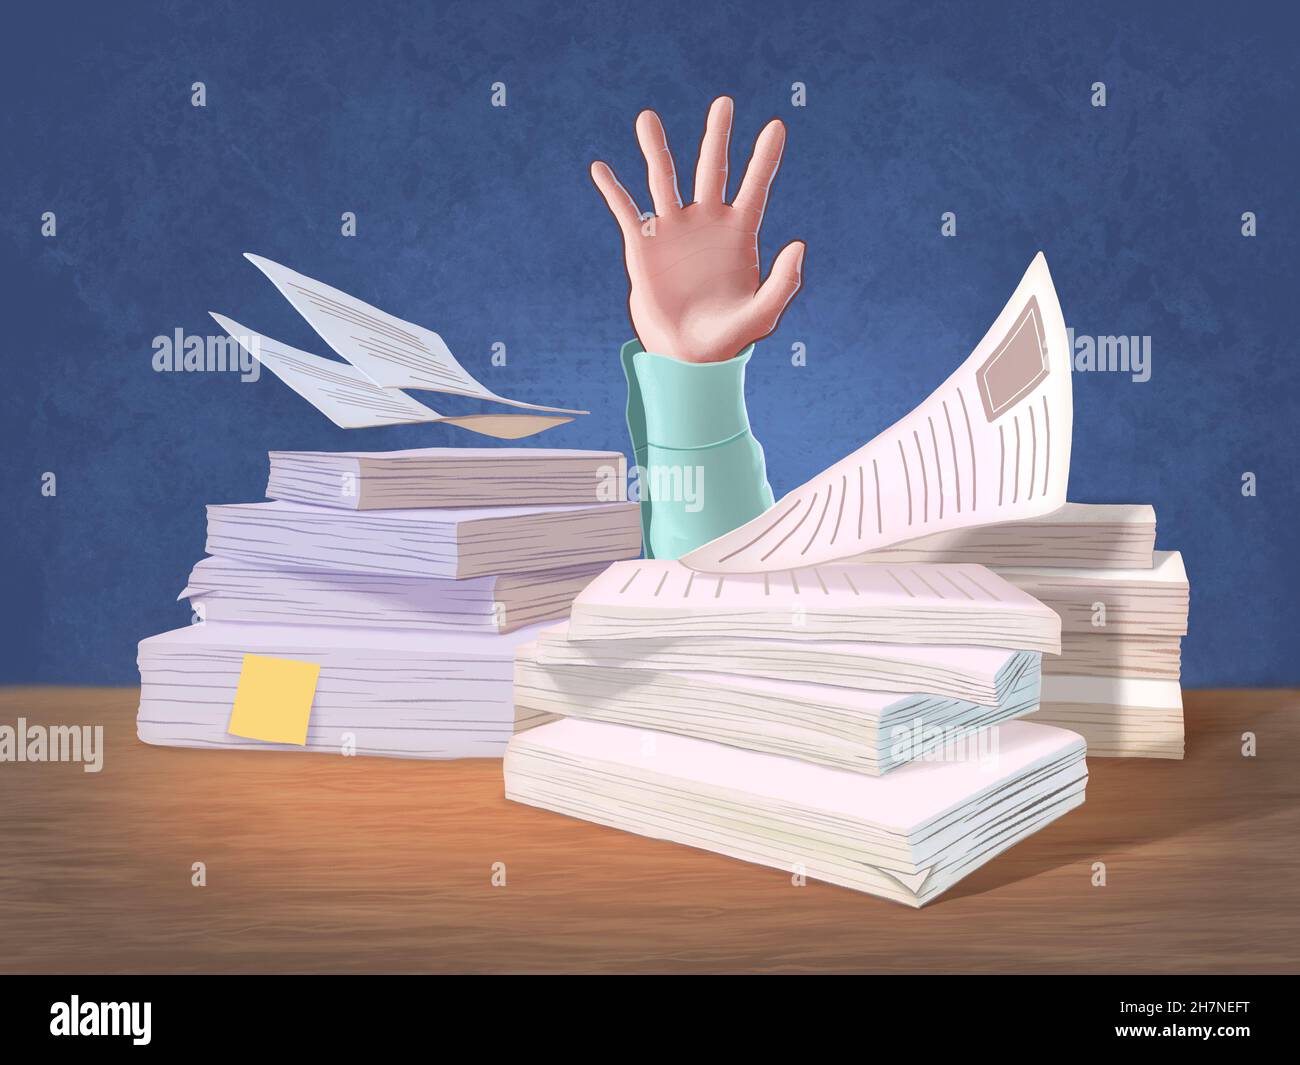 Raised hand asking for help between piles of documents. Digital illustration. Stock Photo